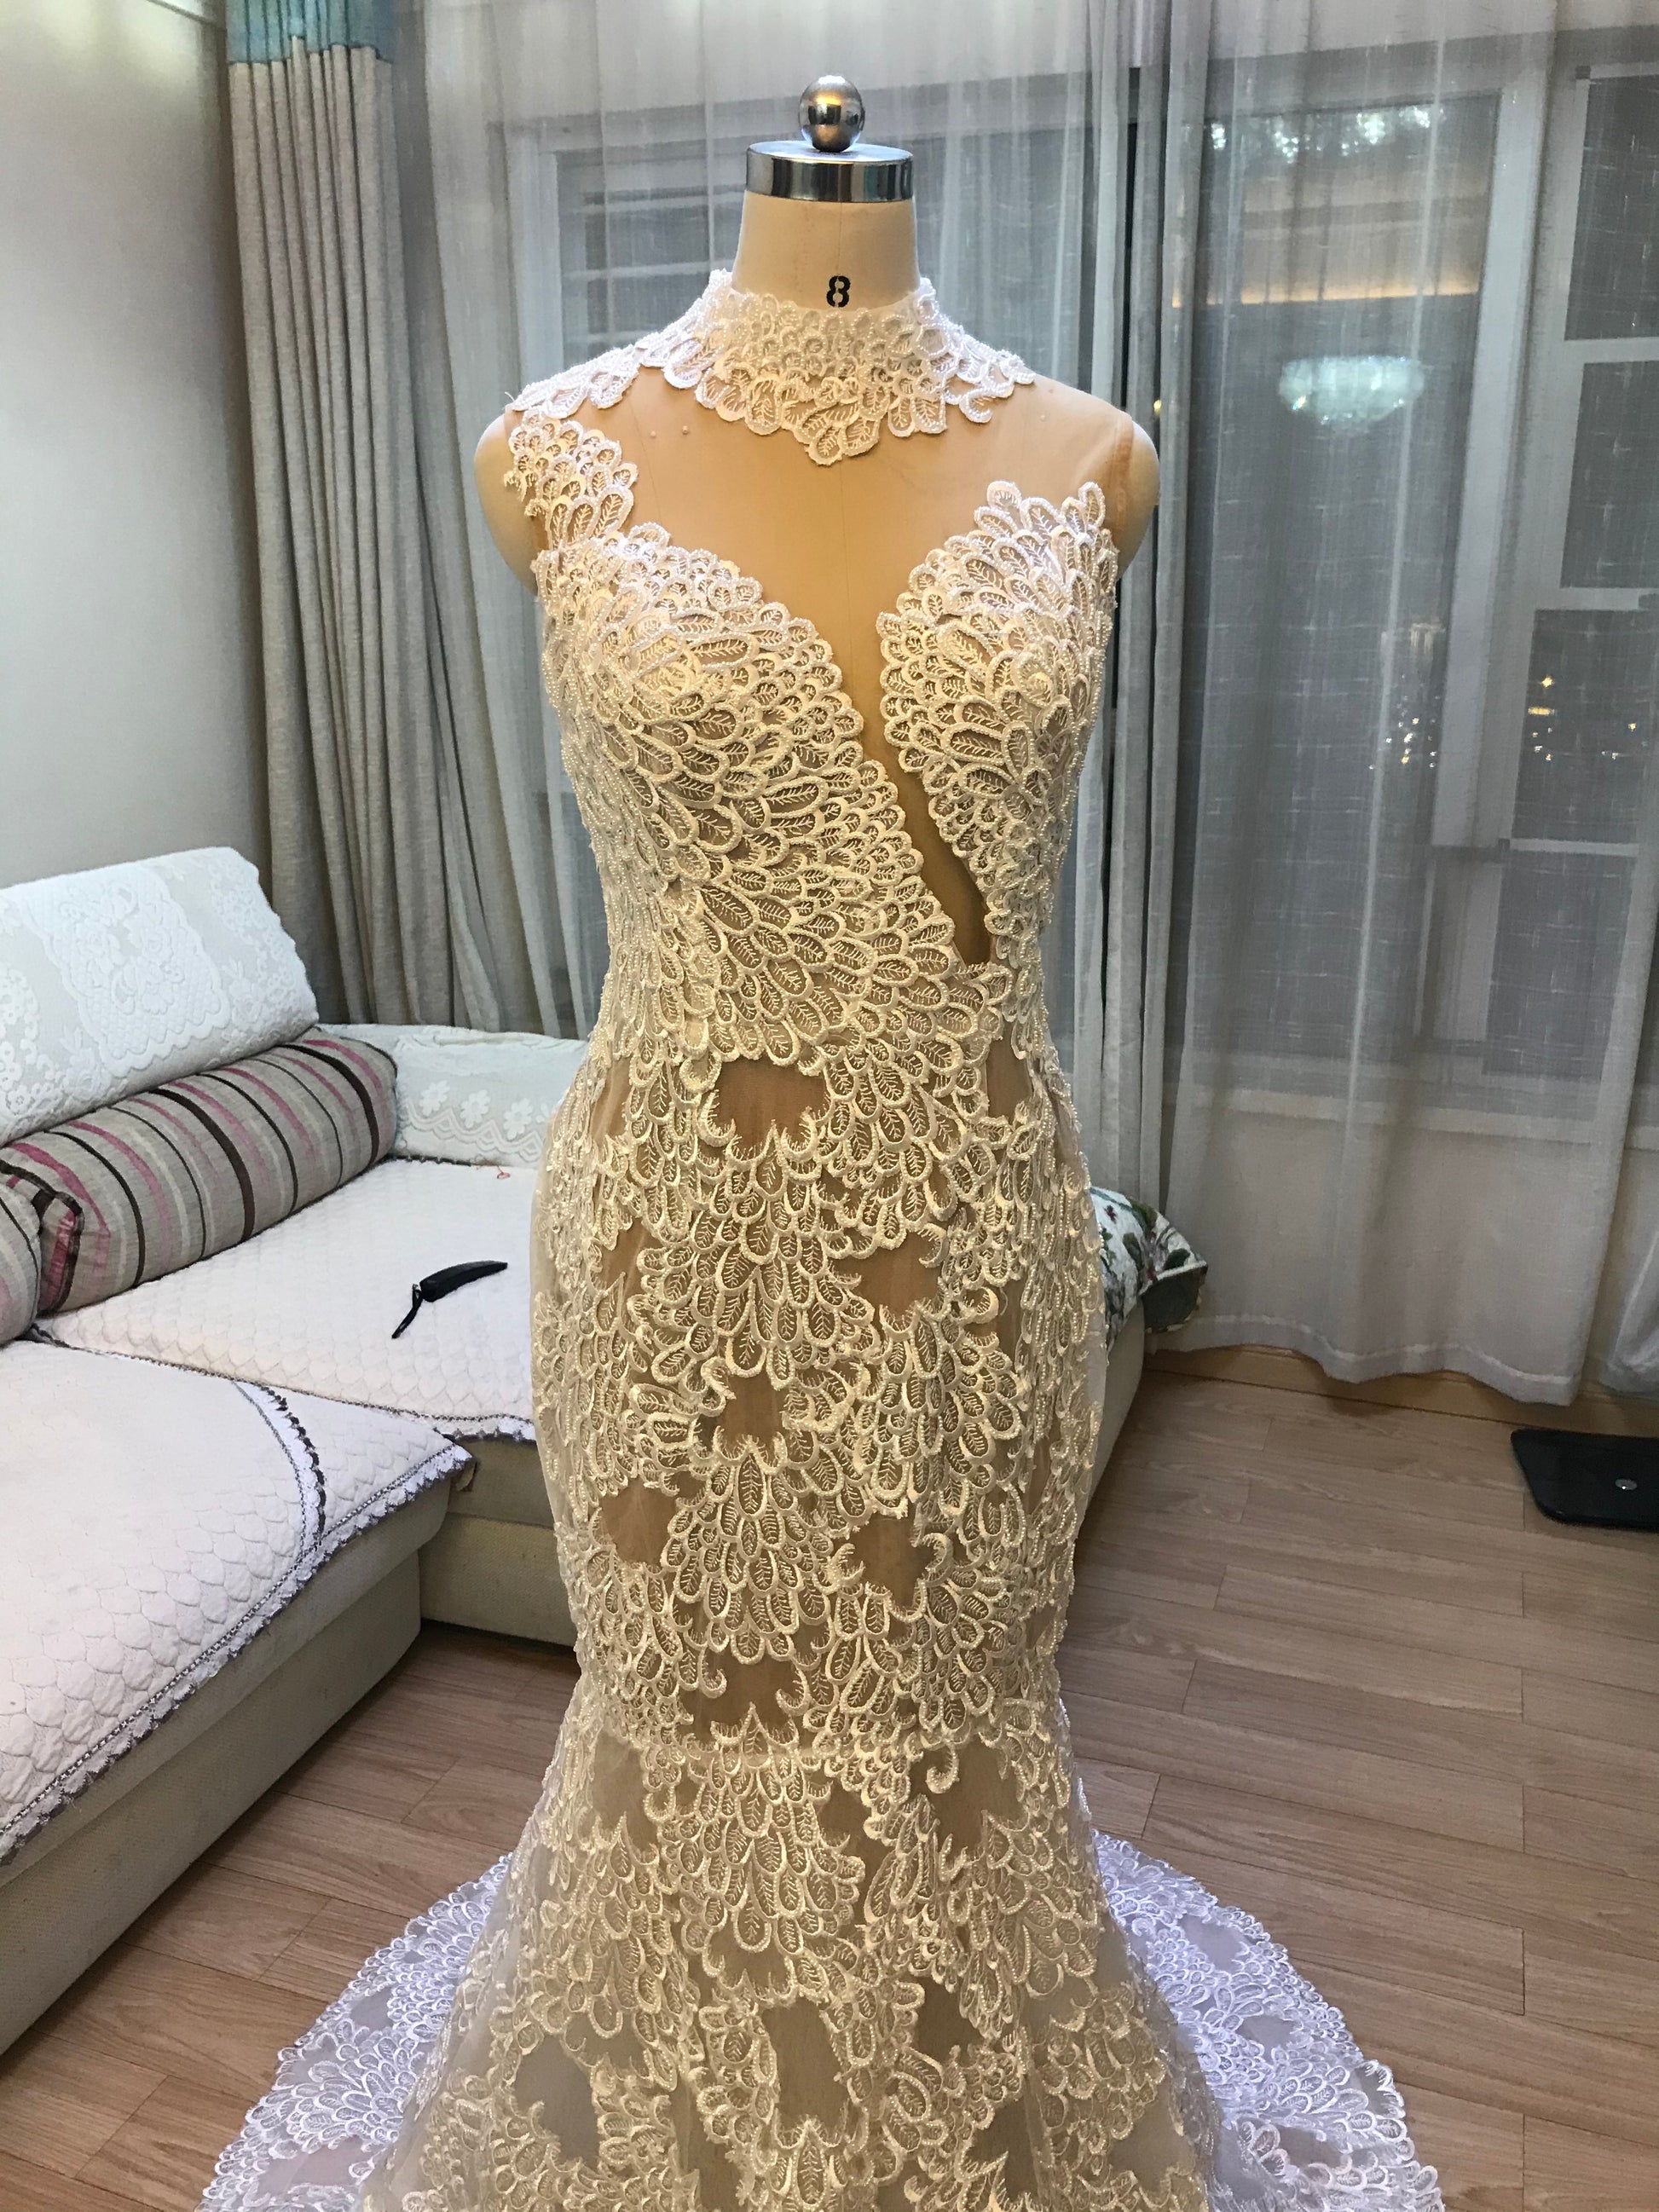 New Sheer High Neck Lace Mermaid Wedding Dress Bridal Gown Sexy See Though Bridal Dresses - LiveTrendsX